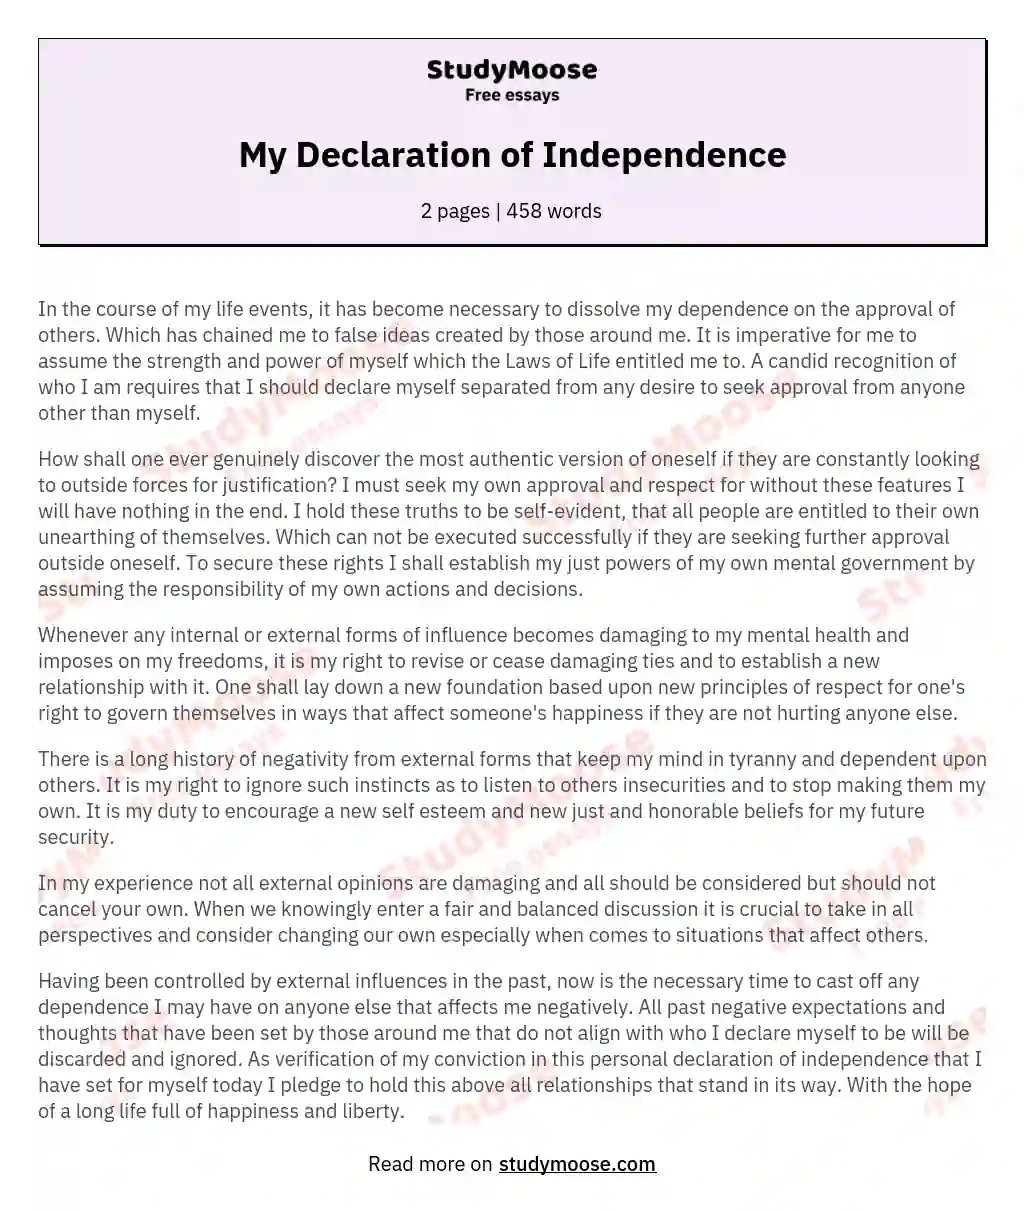 My Declaration of Independence essay